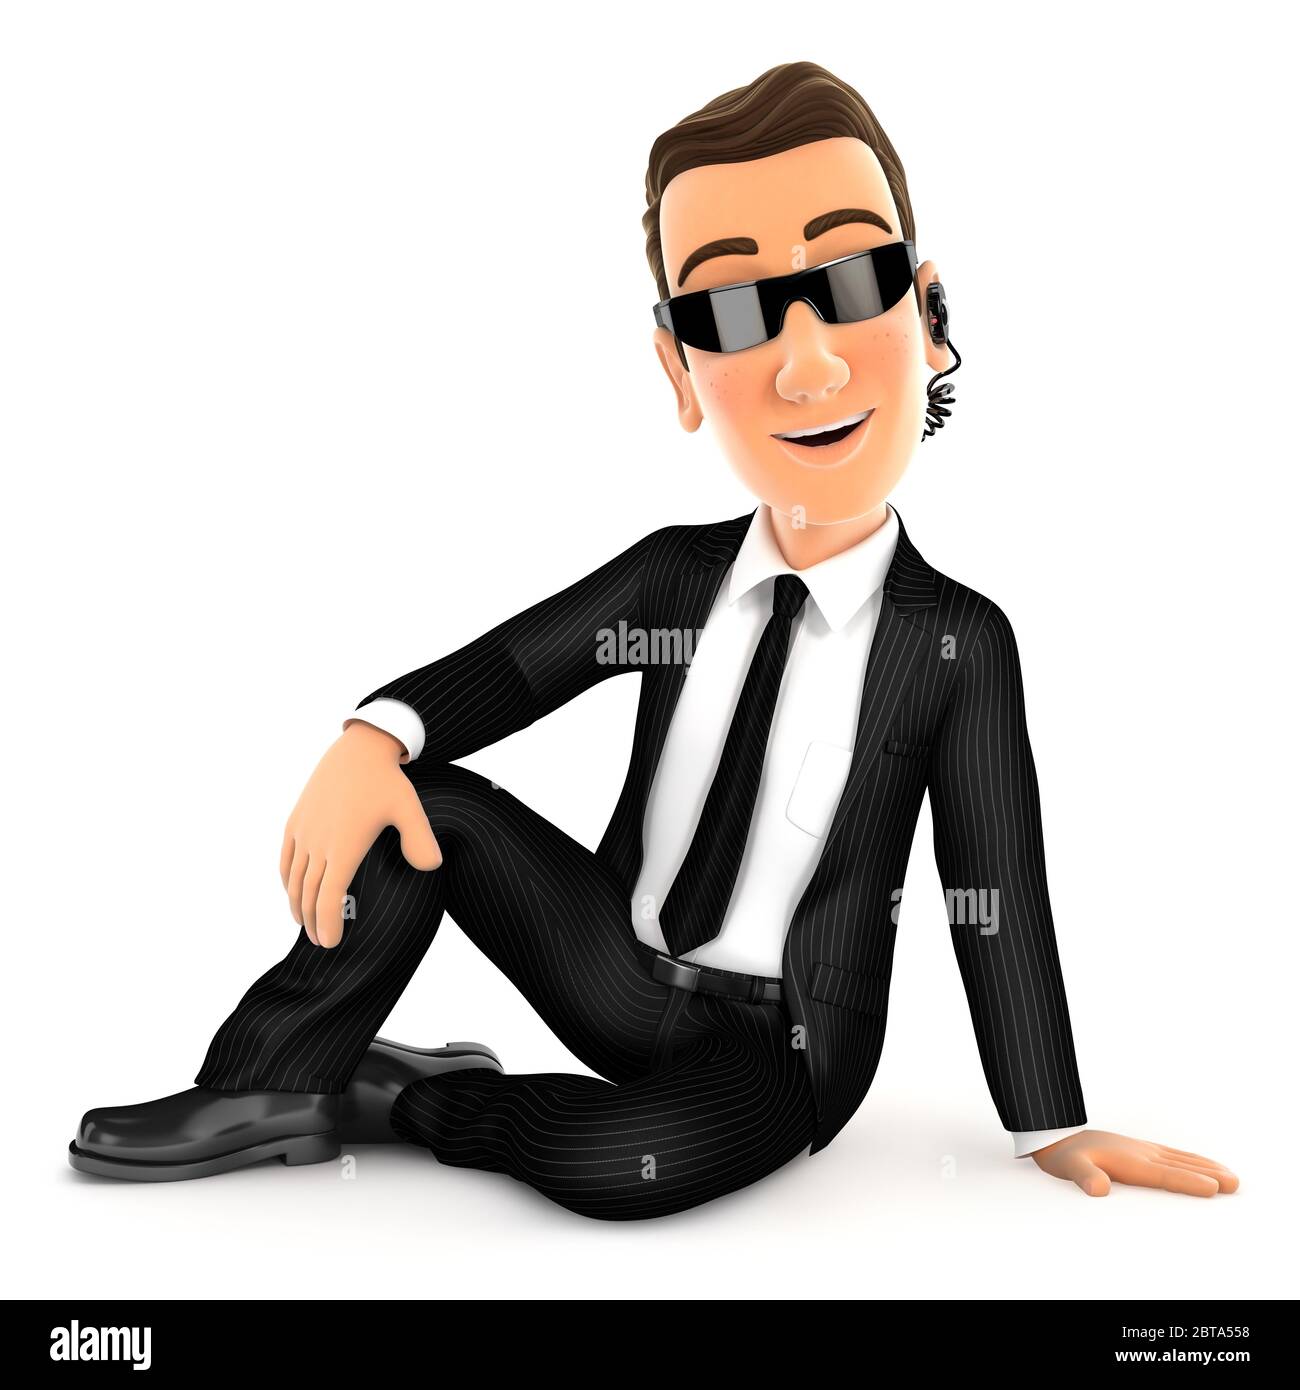 3d security agent sitting on the floor, illustration with isolated white background Stock Photo